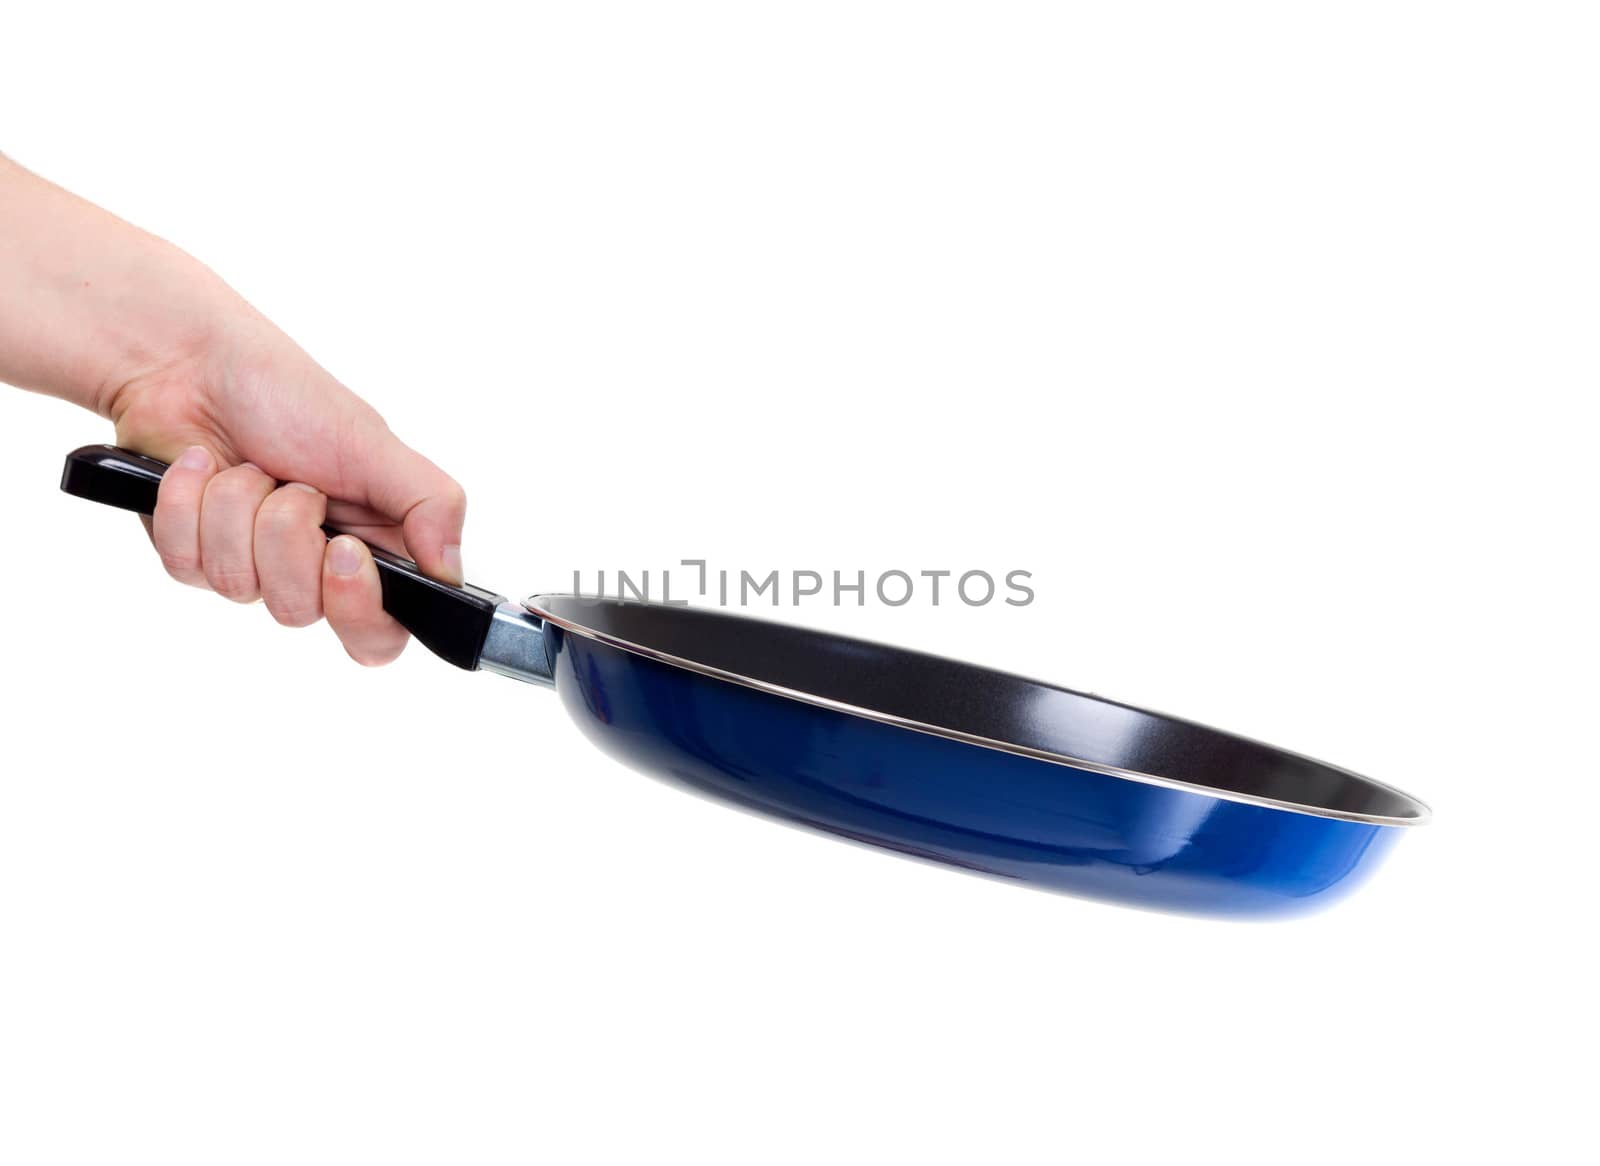 Pan in hand on white background by shutswis